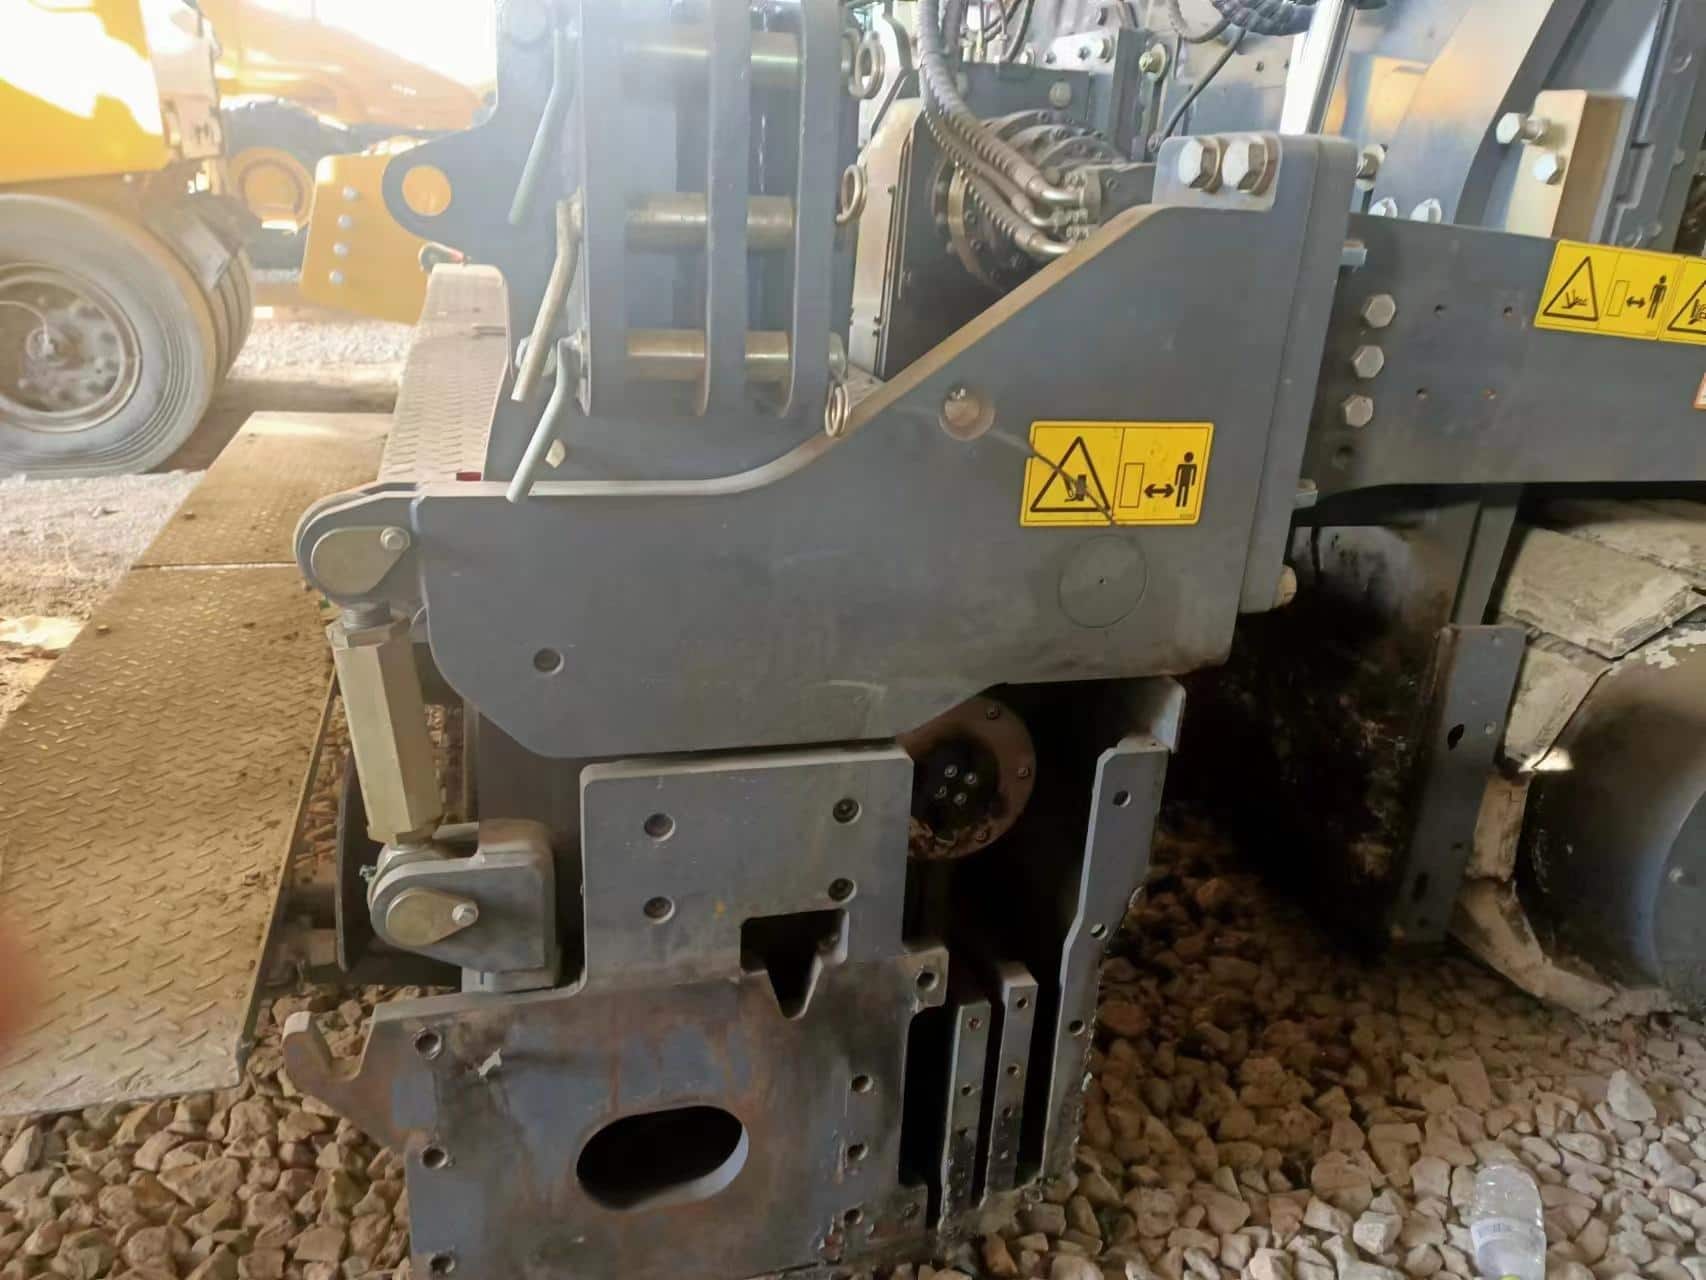 XCMG RP1253T paver